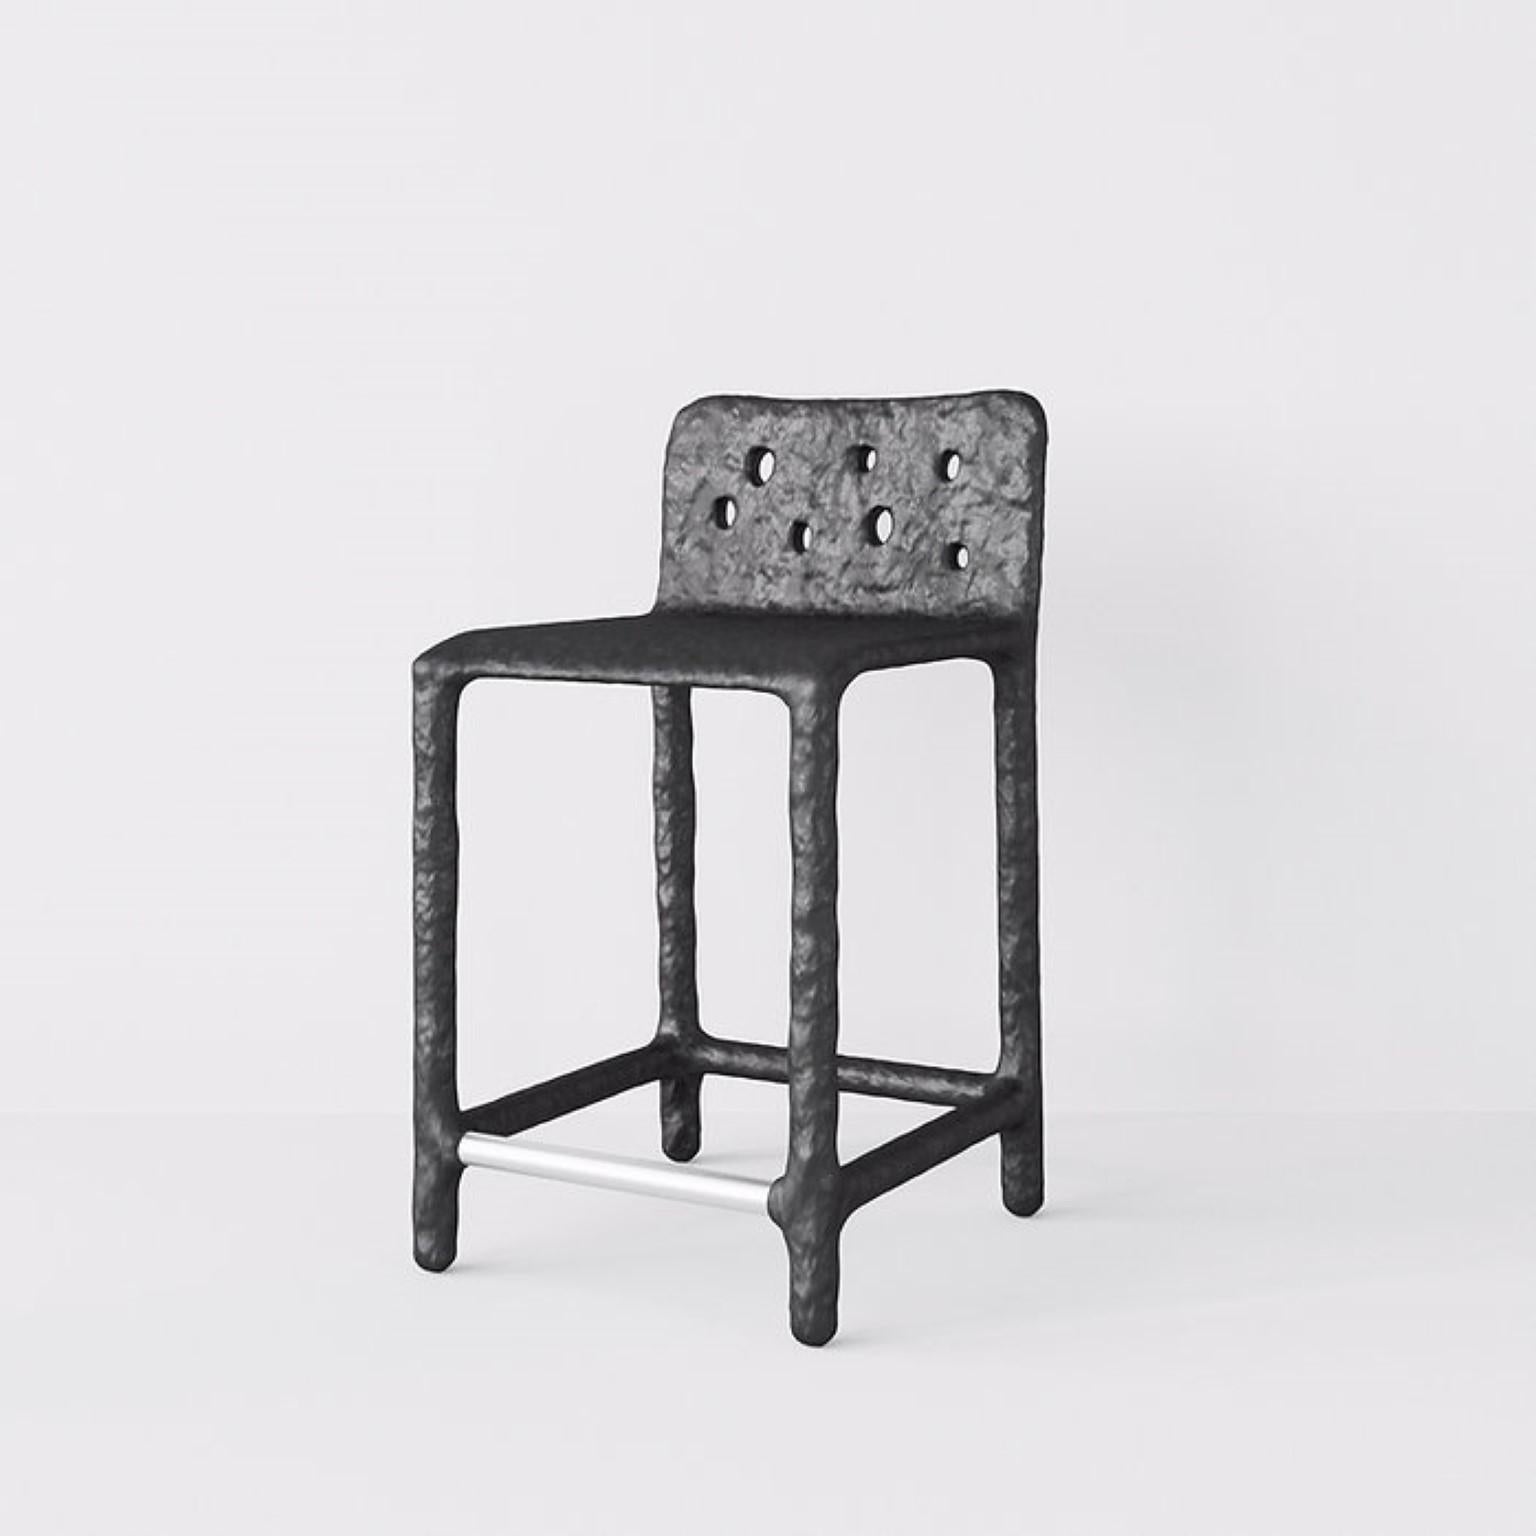 Outdoor black sculpted contemporary half-bar stool by Faina
Design: Victoriya Yakusha
Material: steel, flax rubber, biopolymer, cellulose
Dimensions: W 46 x D 47 x H 84 cm


The plastic silhouette and slightly simple form of ZTISTA furniture